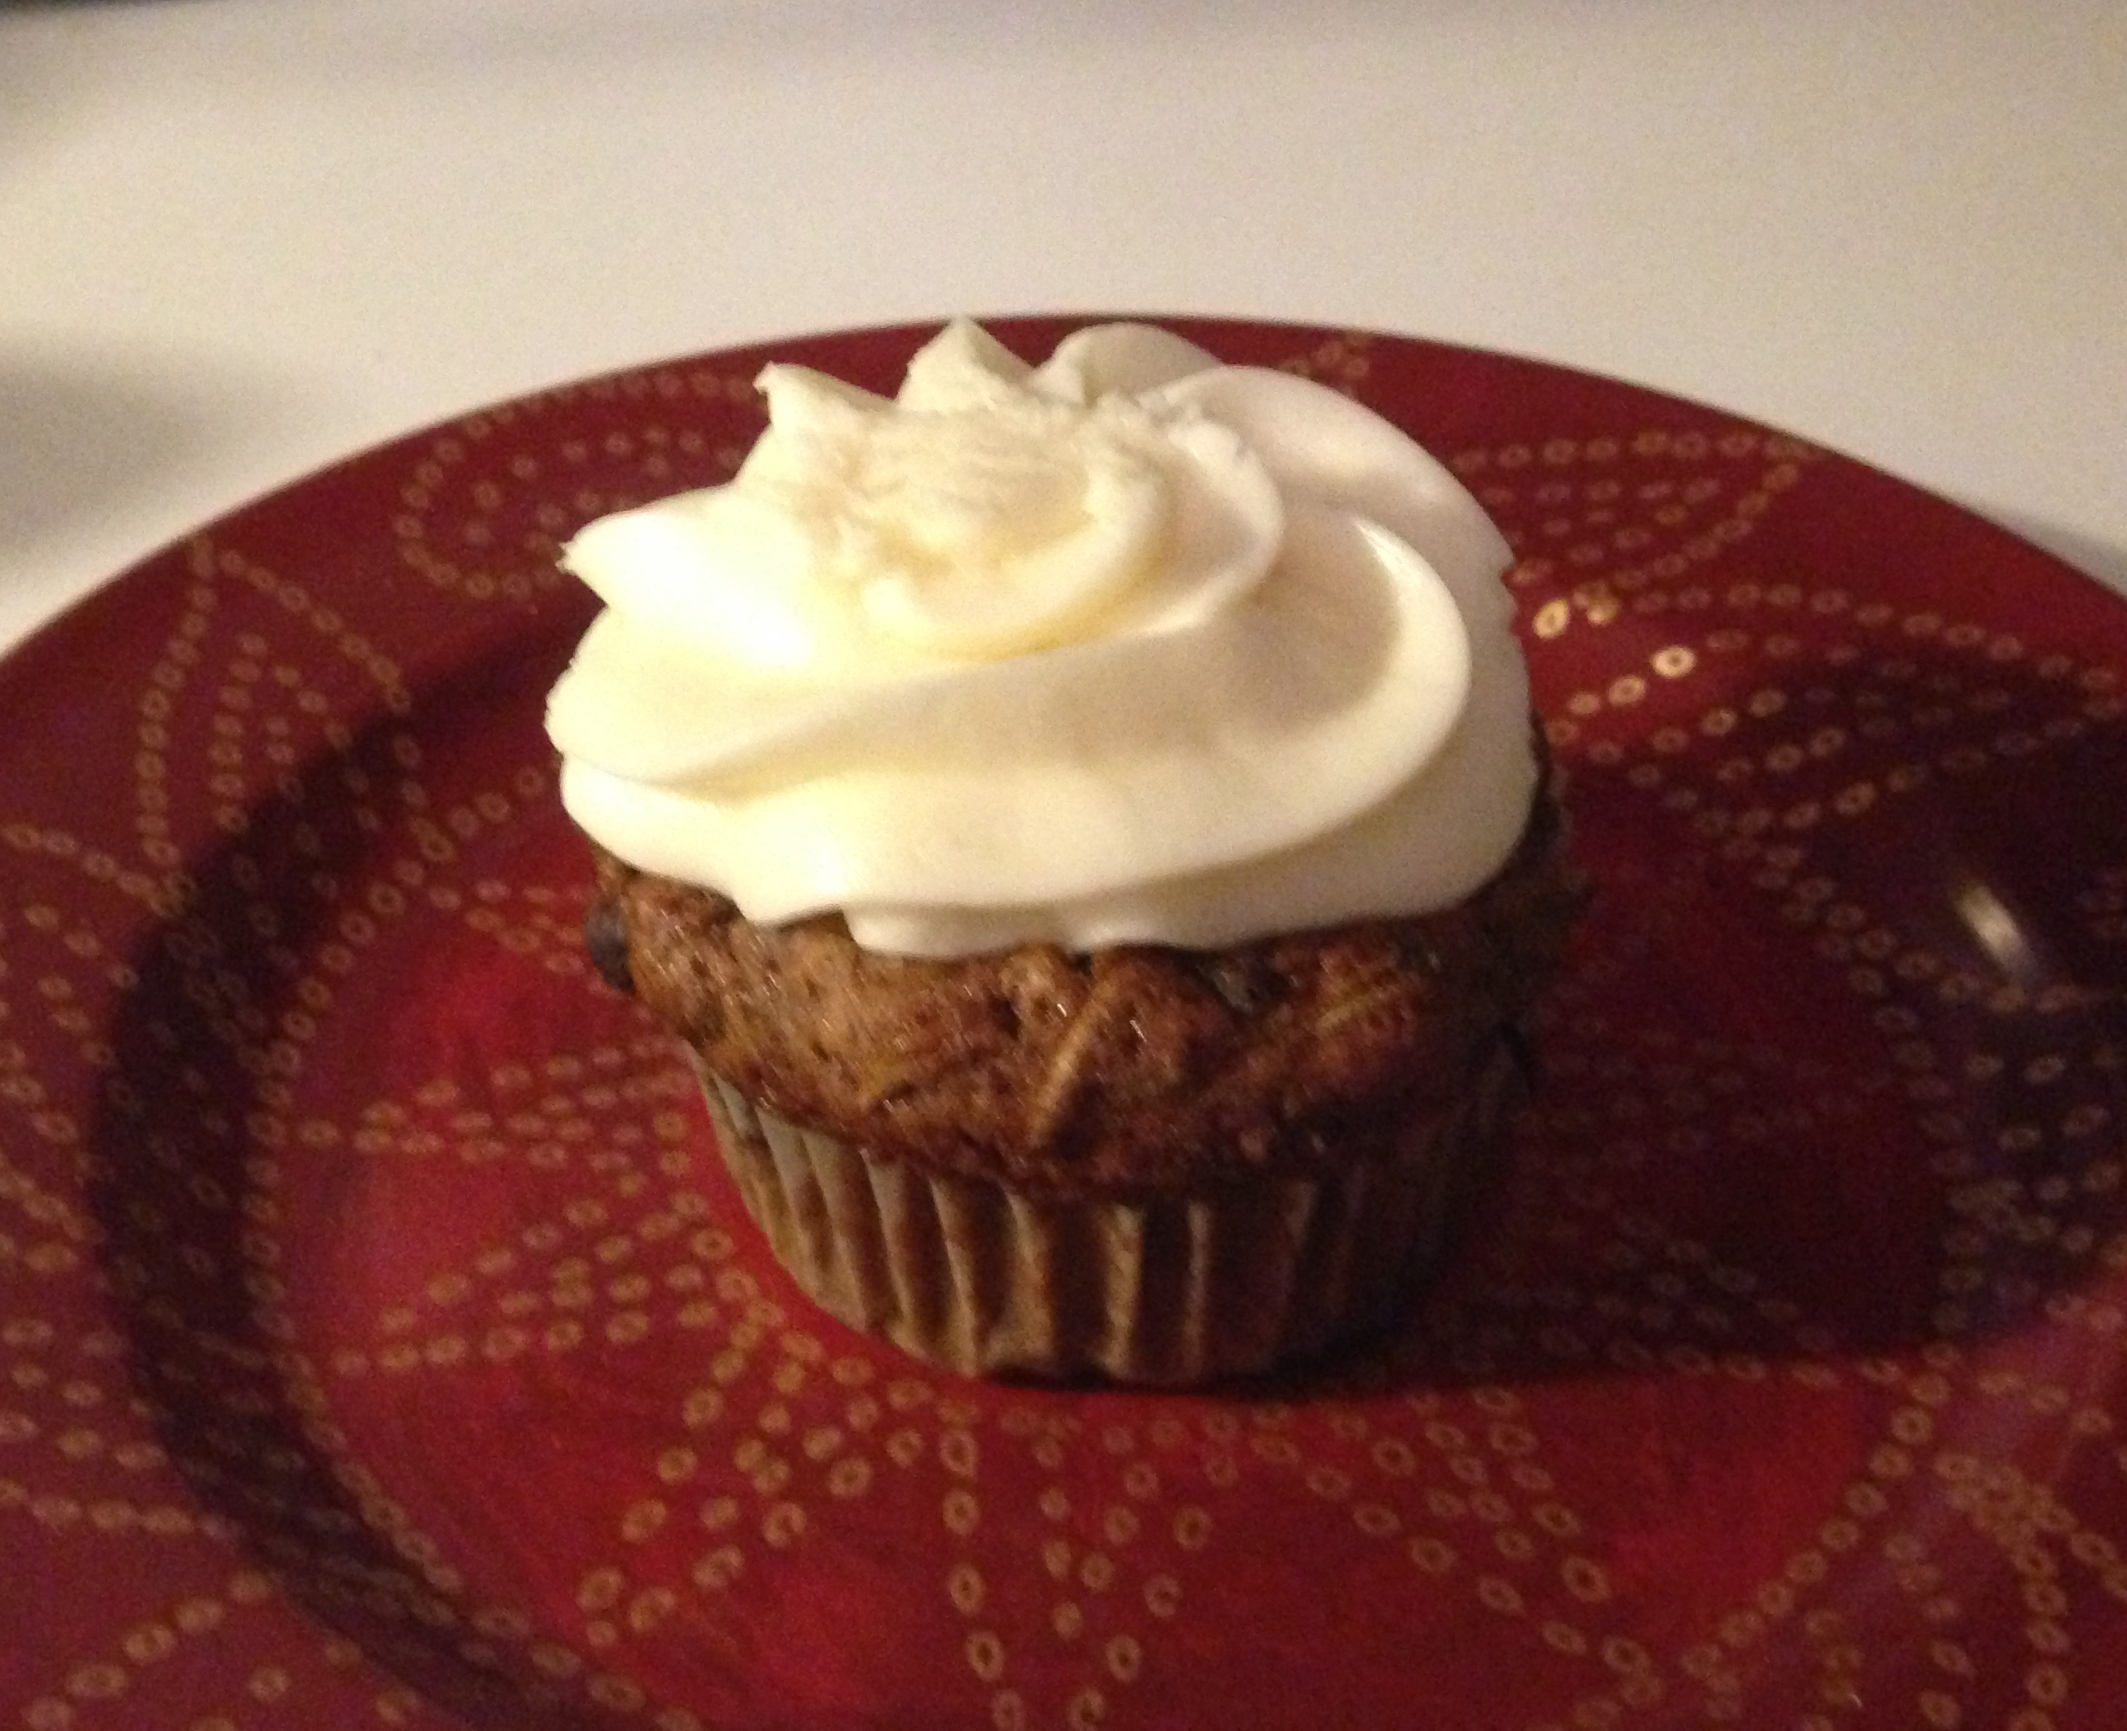 Chocolate-Chip Zucchini Cupcakes with Cream Cheese Frosting